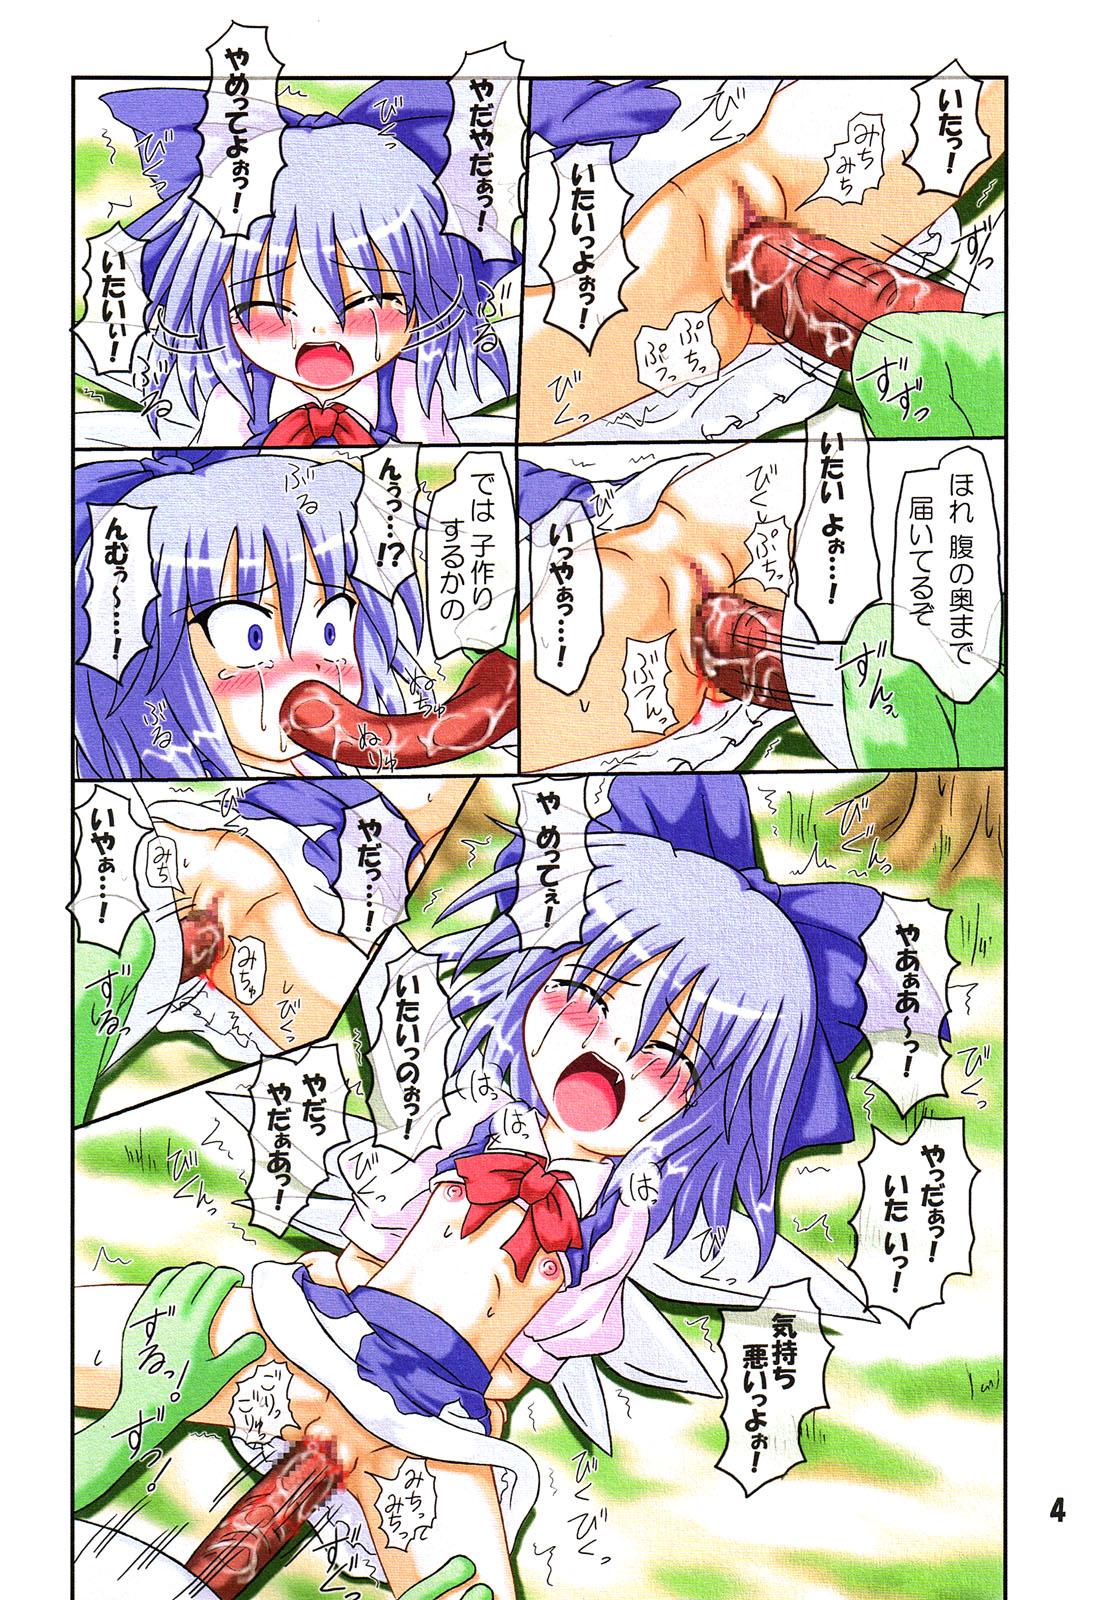 Cousin Rollin 22 - Touhou project Asslick - Page 3